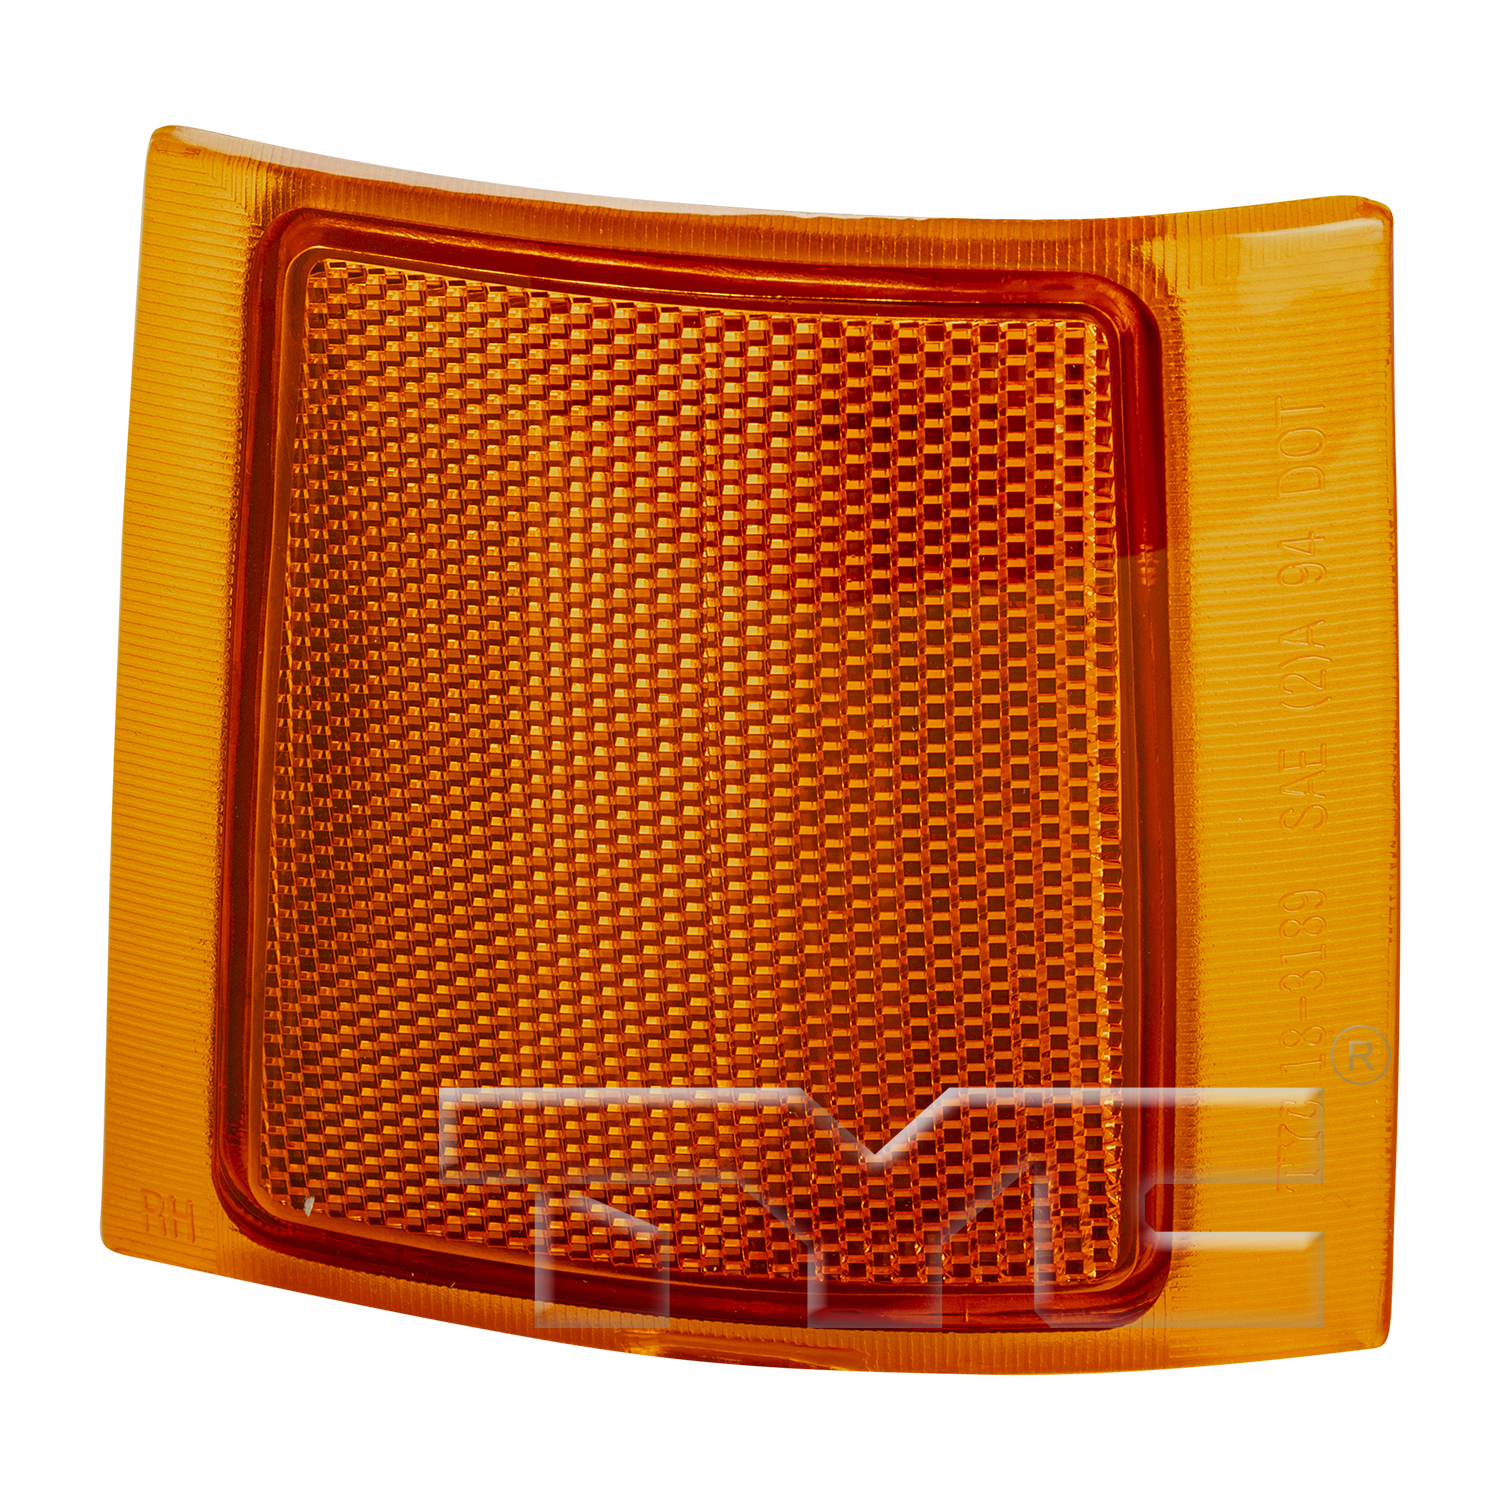 Aftermarket LAMPS for CHEVROLET - C1500 SUBURBAN, C1500 SUBURBAN,94-99,RT Front marker lamp assy